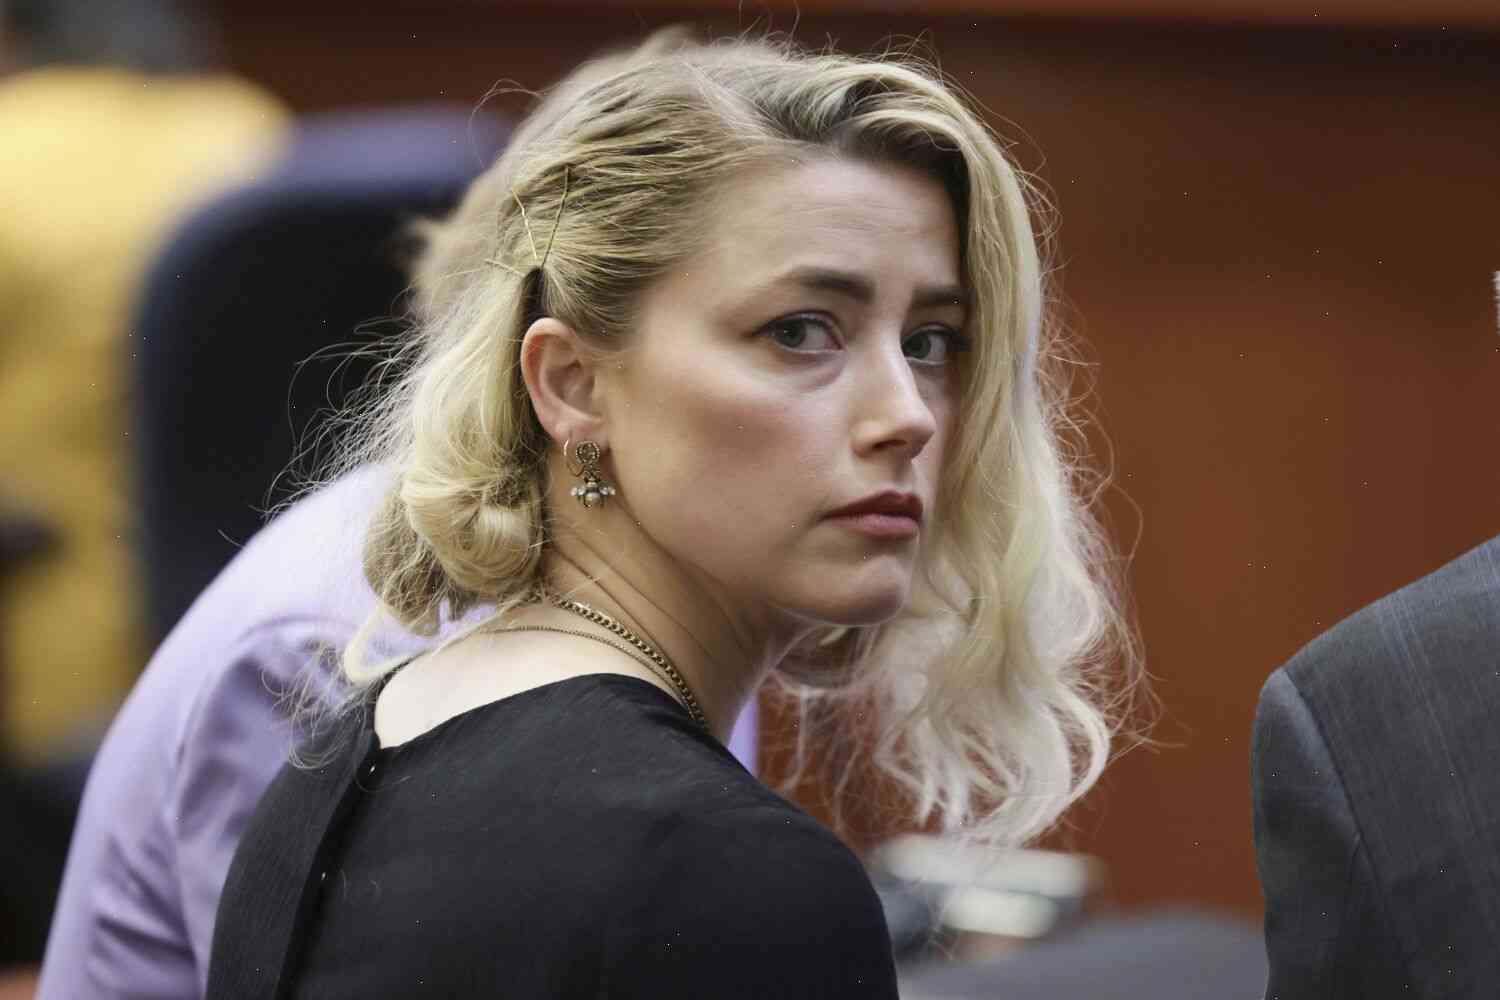 Amber Heard is being represented by the U.N. Human Rights Council